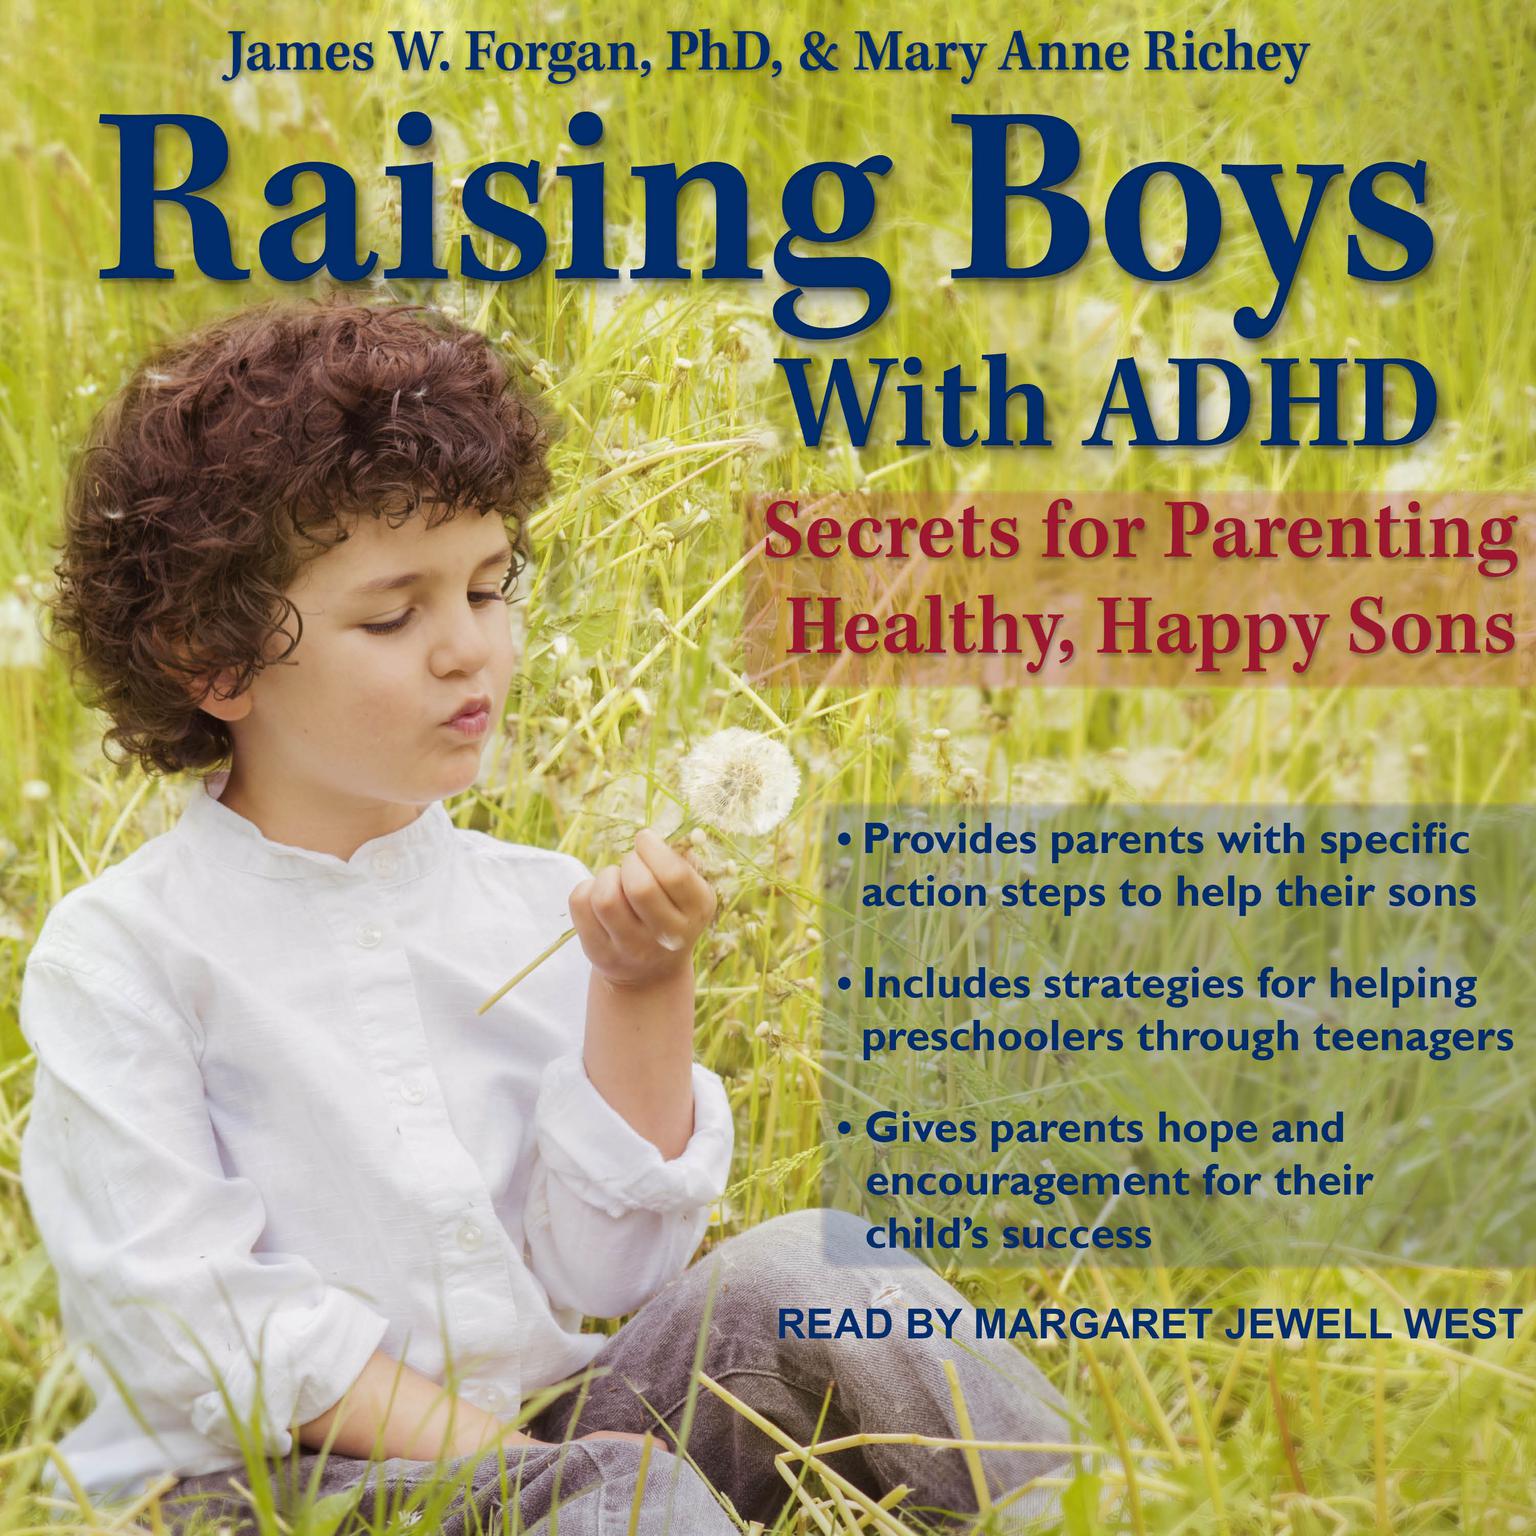 Raising Boys with ADHD: Secrets for Parenting Healthy, Happy Sons Audiobook, by James Forgan